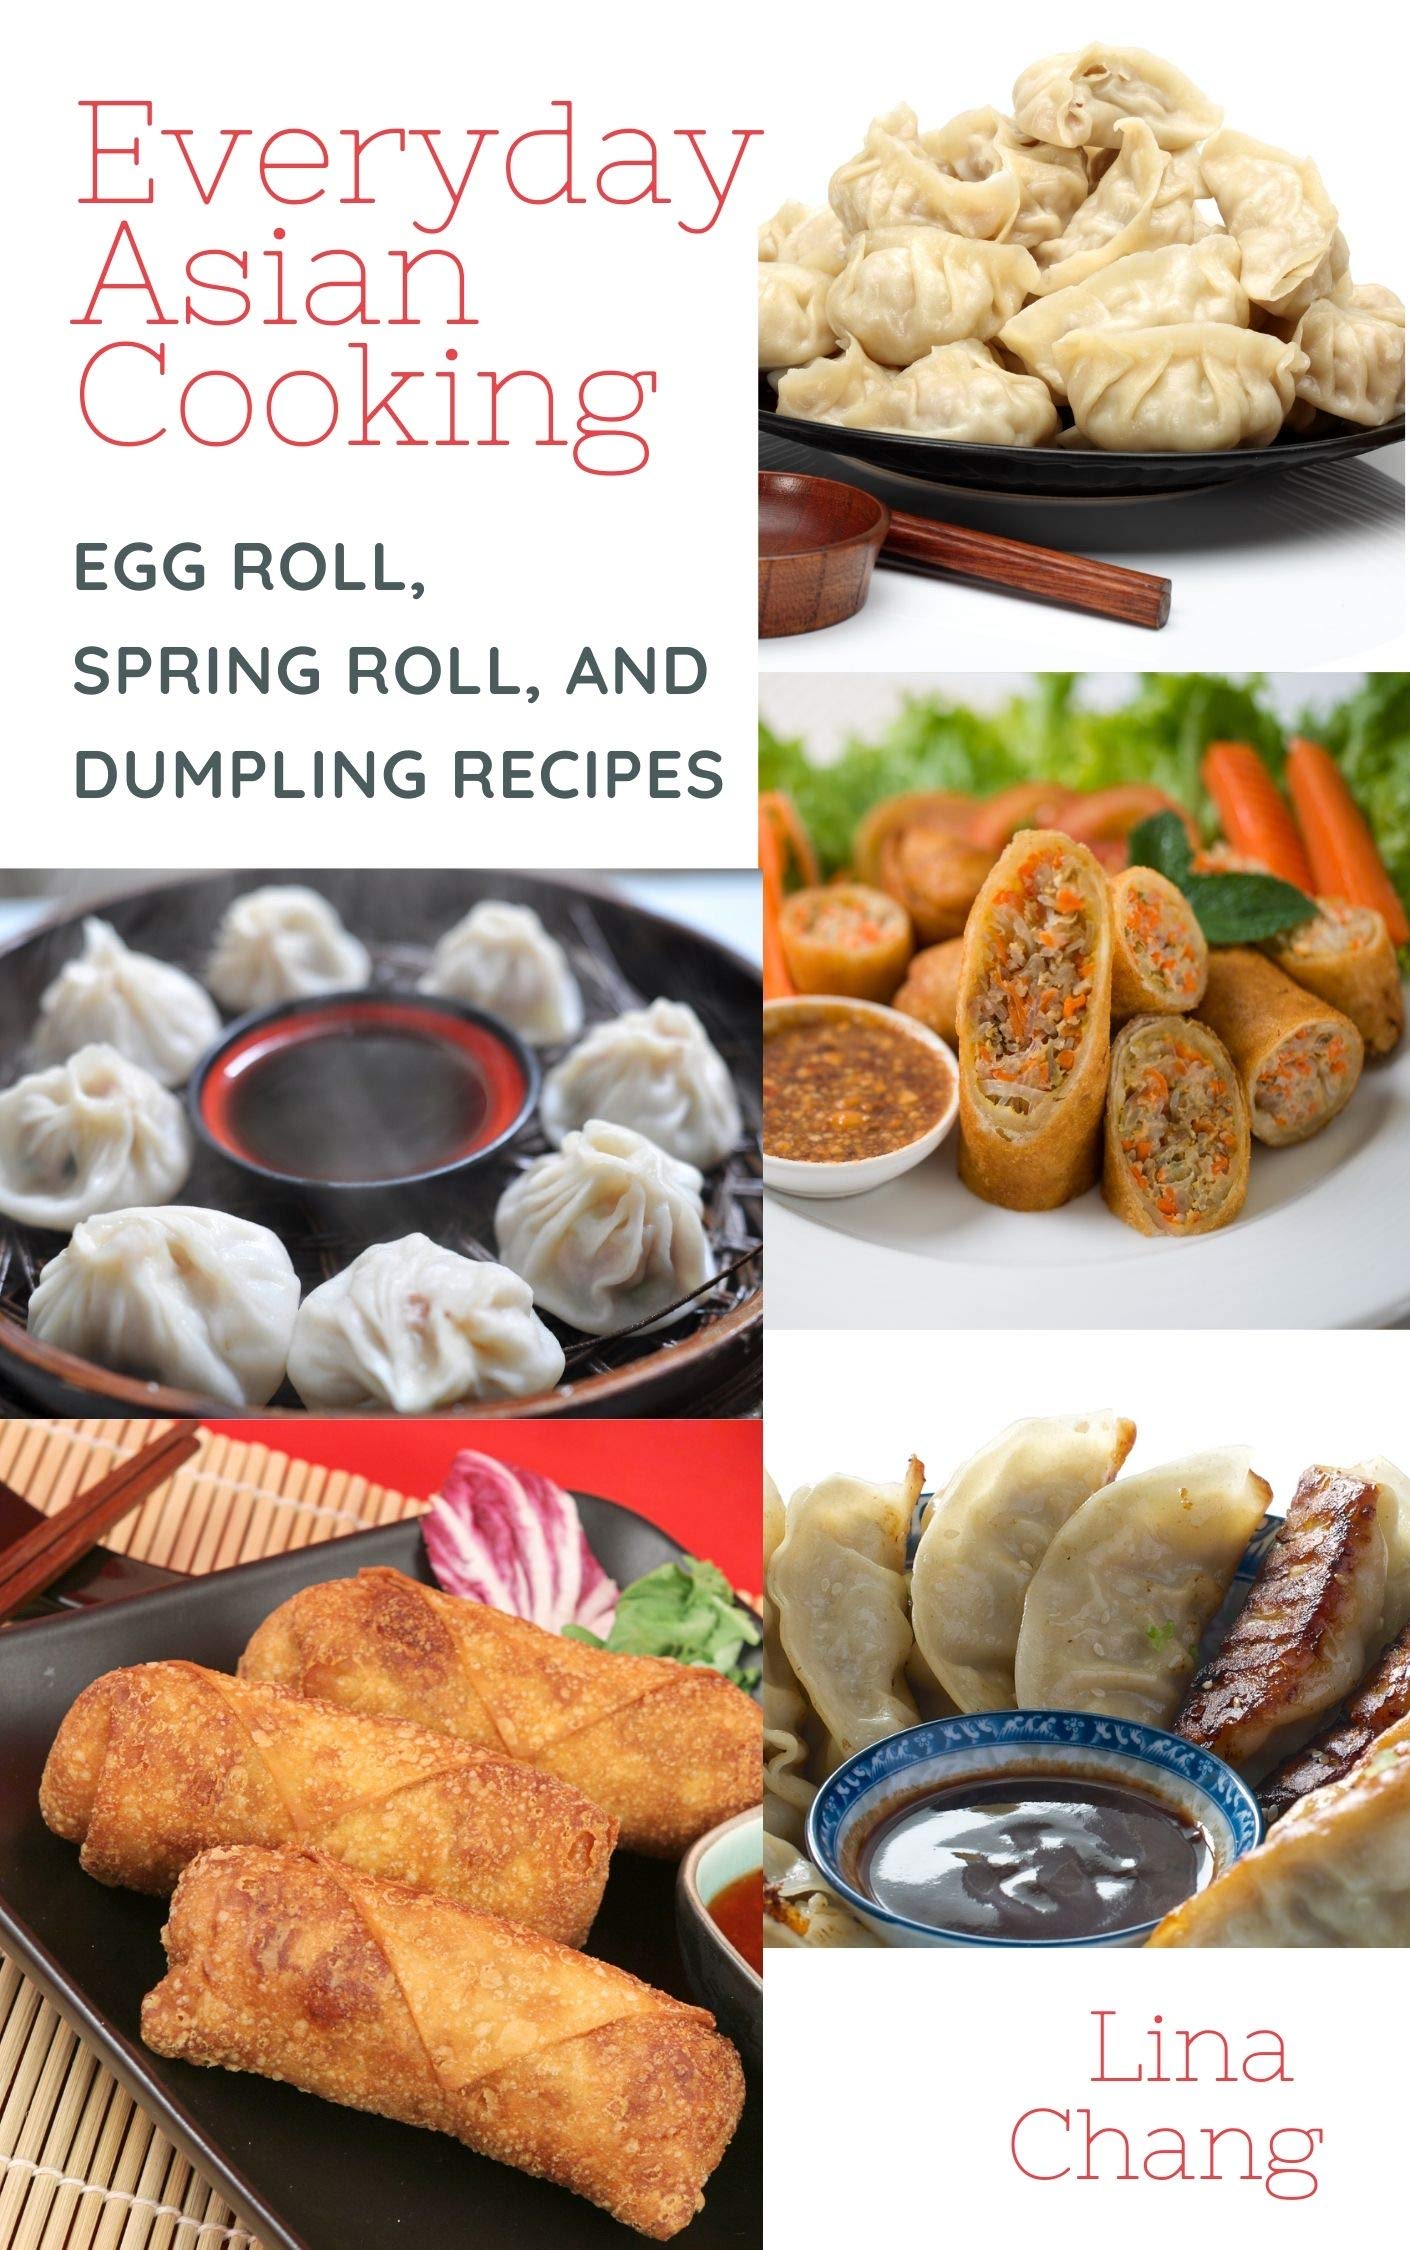 Everyday Asian Cooking: Egg Roll, Spring Roll, and Dumpling Recipes (Quick and Easy Asian Cookbooks Book 2)